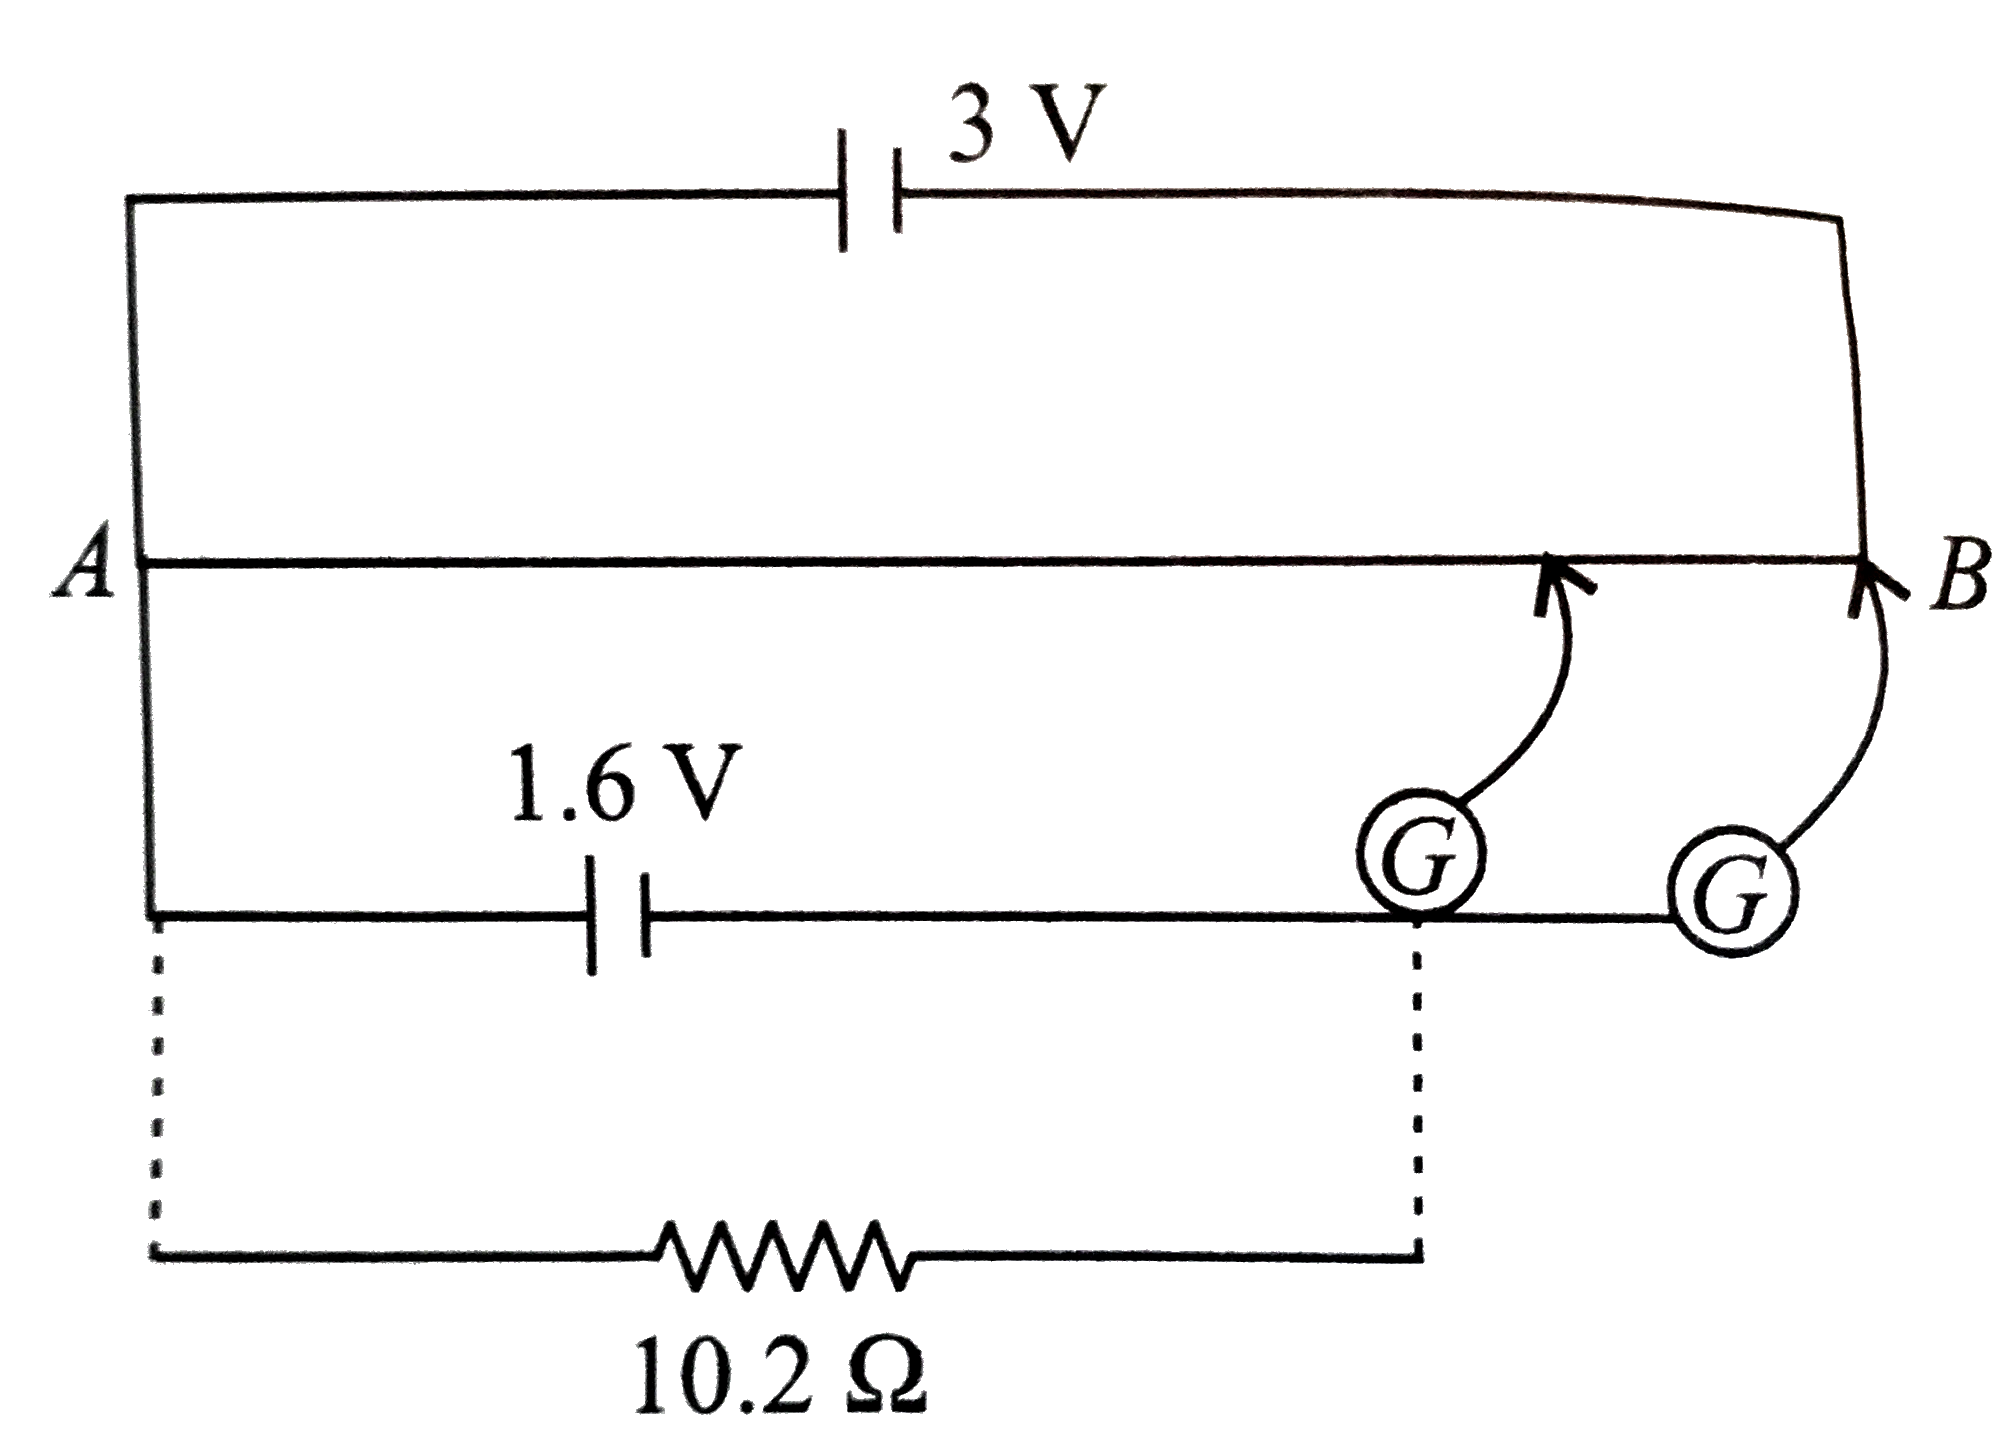 3V poteniometer used for the determination of internal resistance of a 2.4V cell. The balanced point of the cell in open circuit is 75.8cm. When a resistor of 10.2Omega is used in the external circuit of the cell the balance point shifts to 68.3cm length of the potentiometer wire. The internal resistance of the cell is